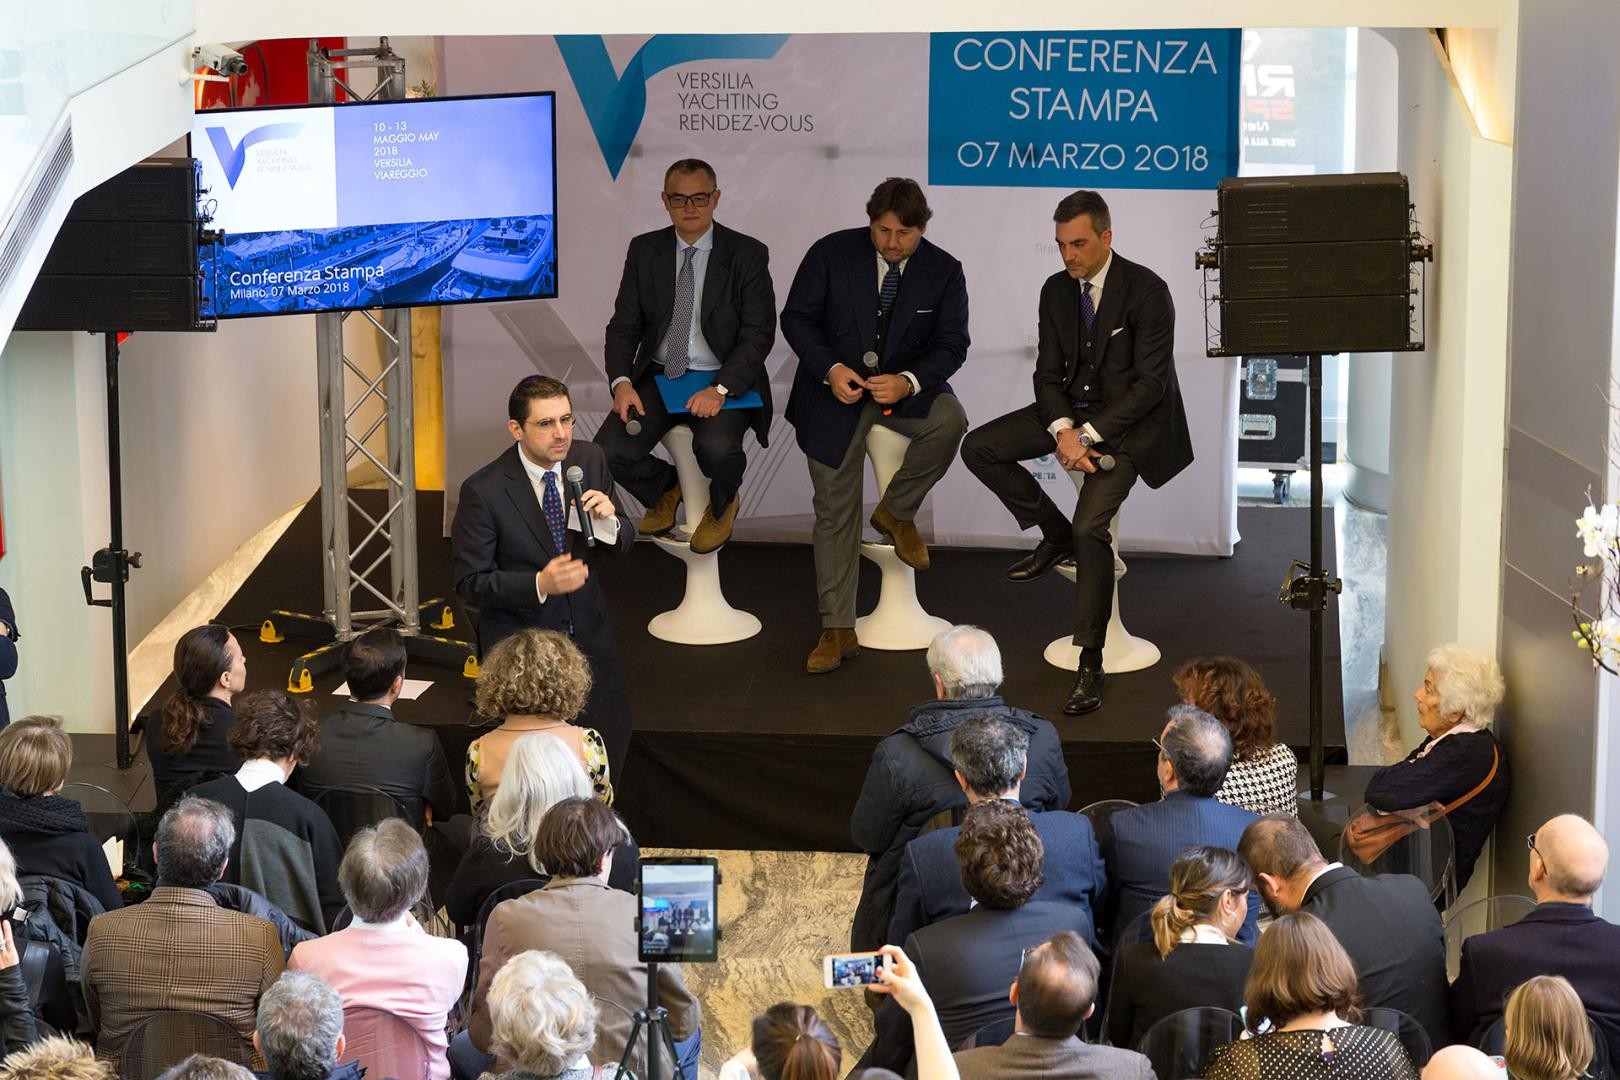 Versilia Yachting Rendez-vous with more than 170 exhibiting companies